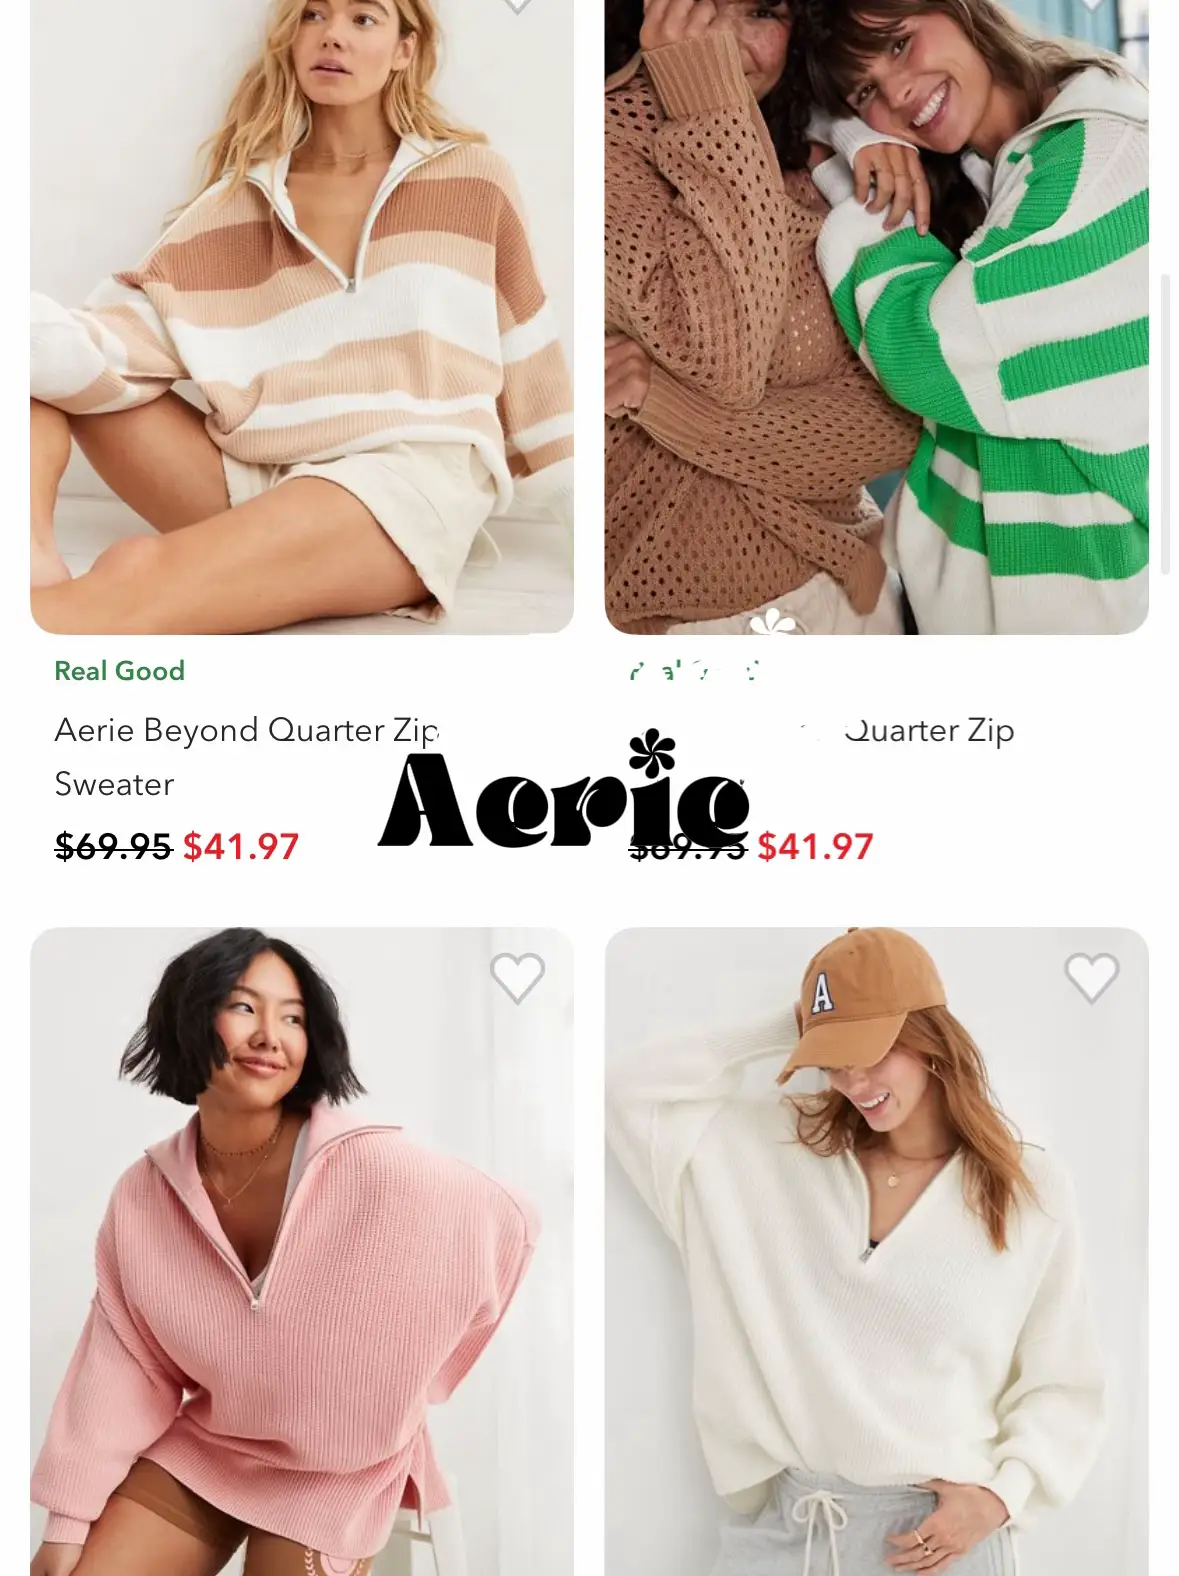 Aerie - The can't-get-enough-of-it waistband meets a brand new